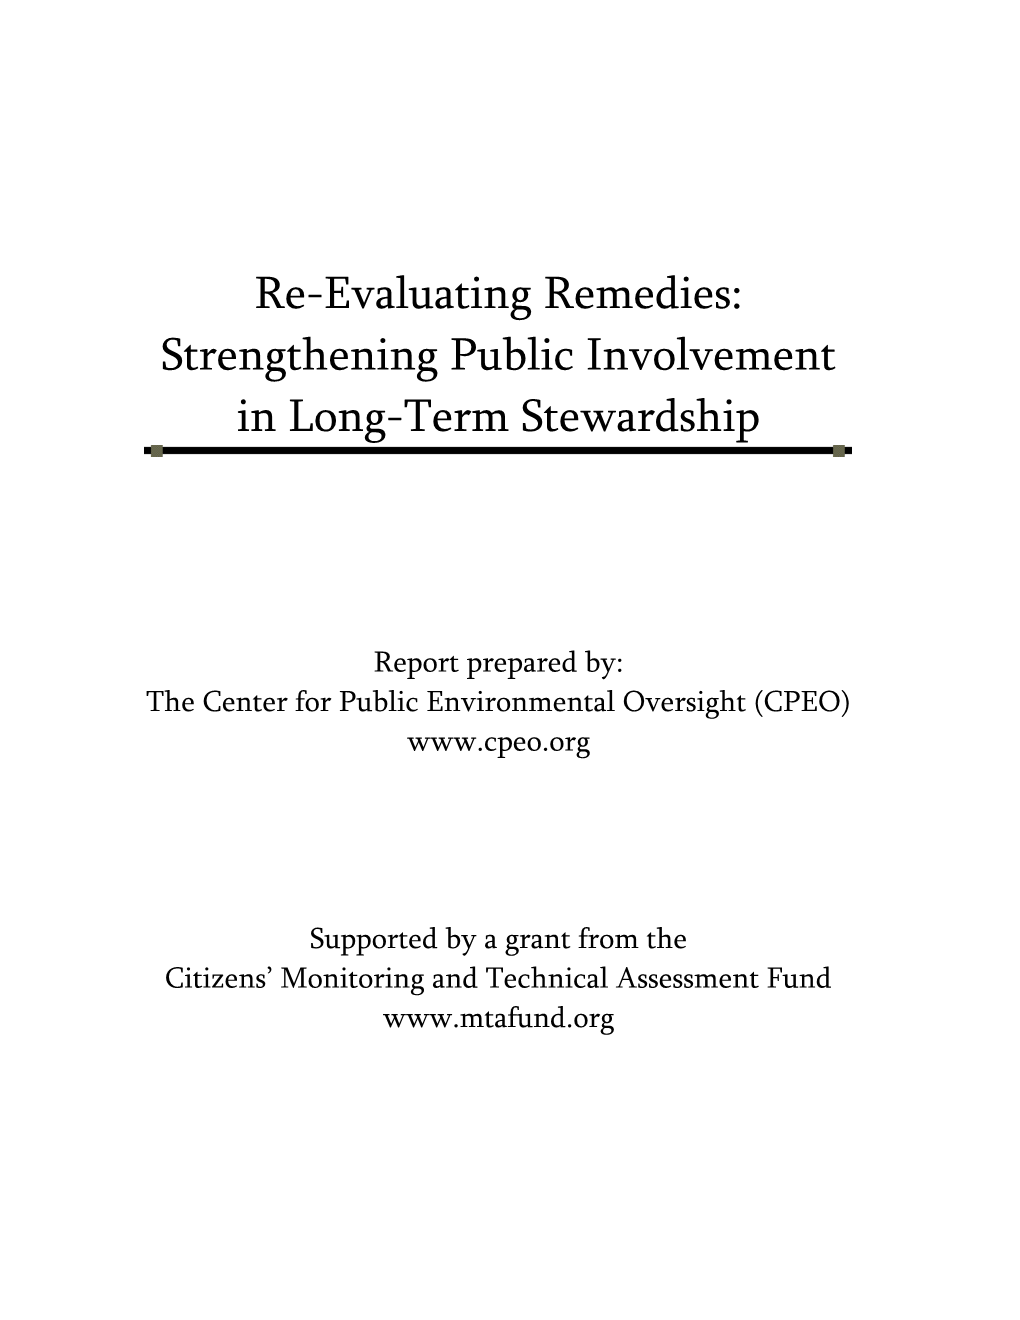 Re-Evaluating Remedies: Strengthening Public Involvement in Long-Term Stewardship